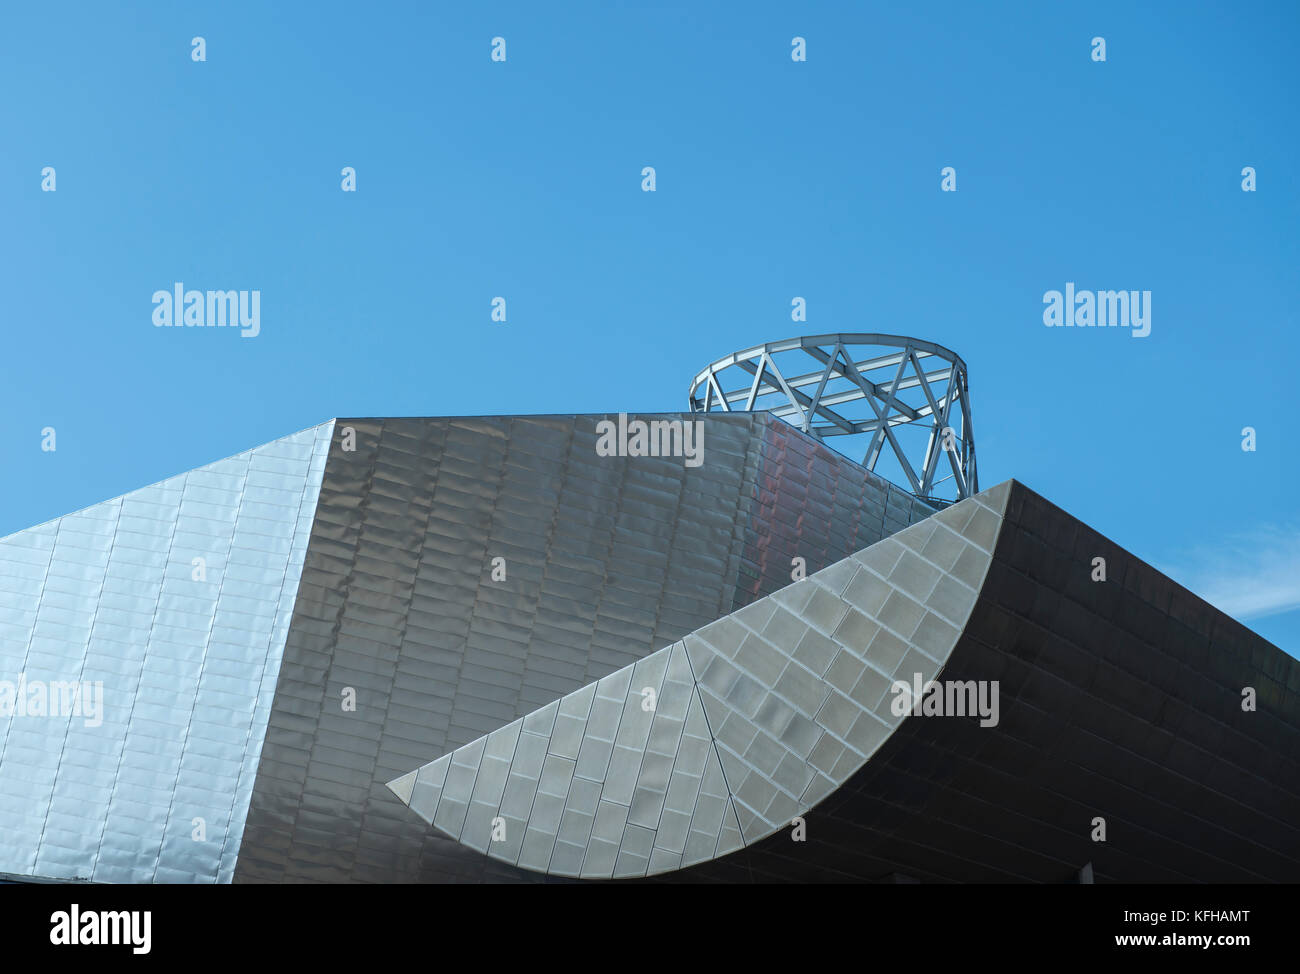 Architectural detail of the the Lowry Theatre at Salford Quays in Manchester, England Stock Photo